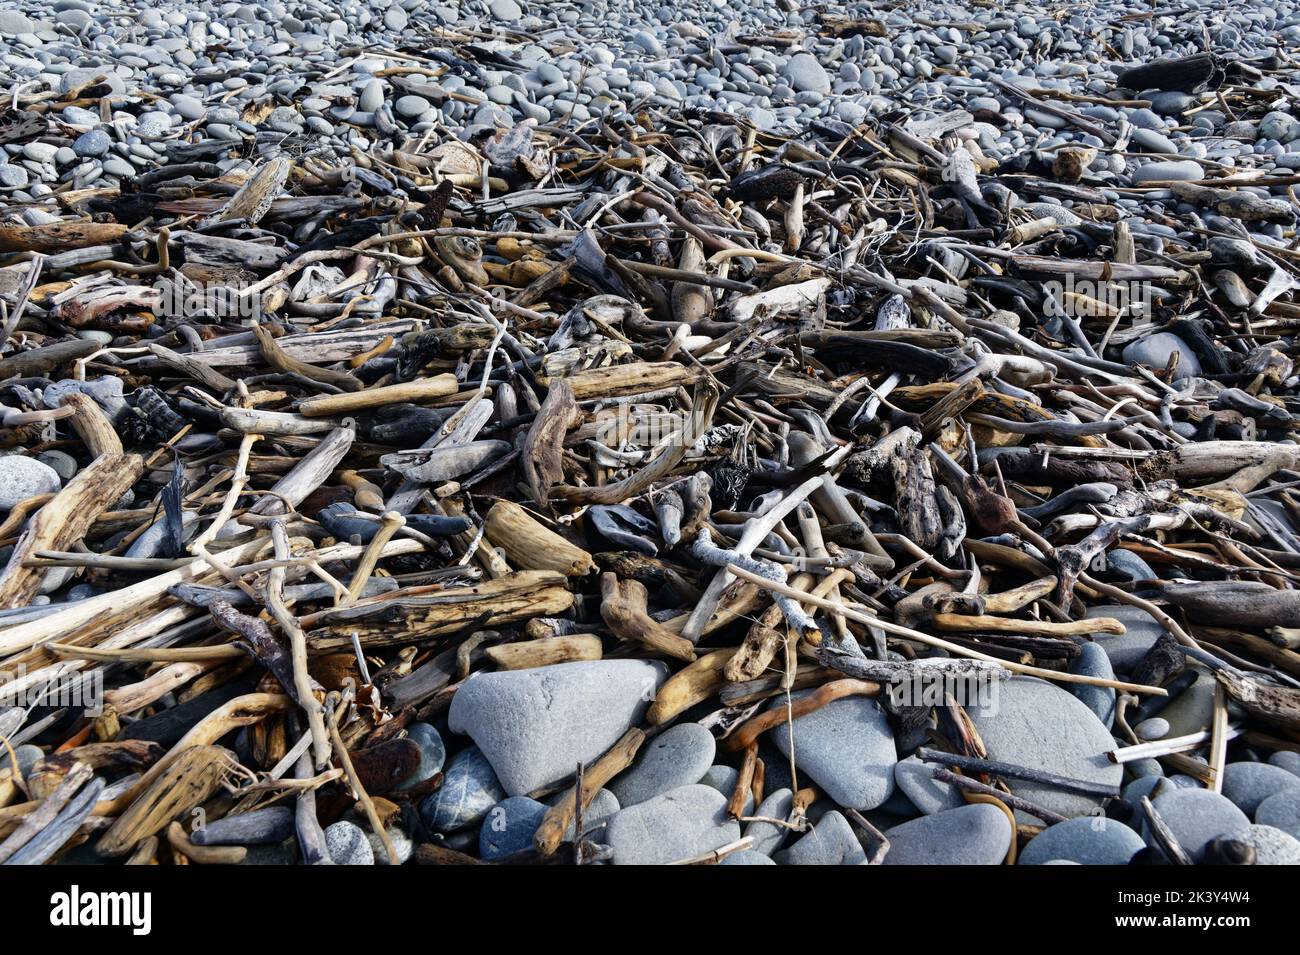 Driftwood sits on top of rocks and stones on a beach in Aotearoa, New Zealand. Stock Photo